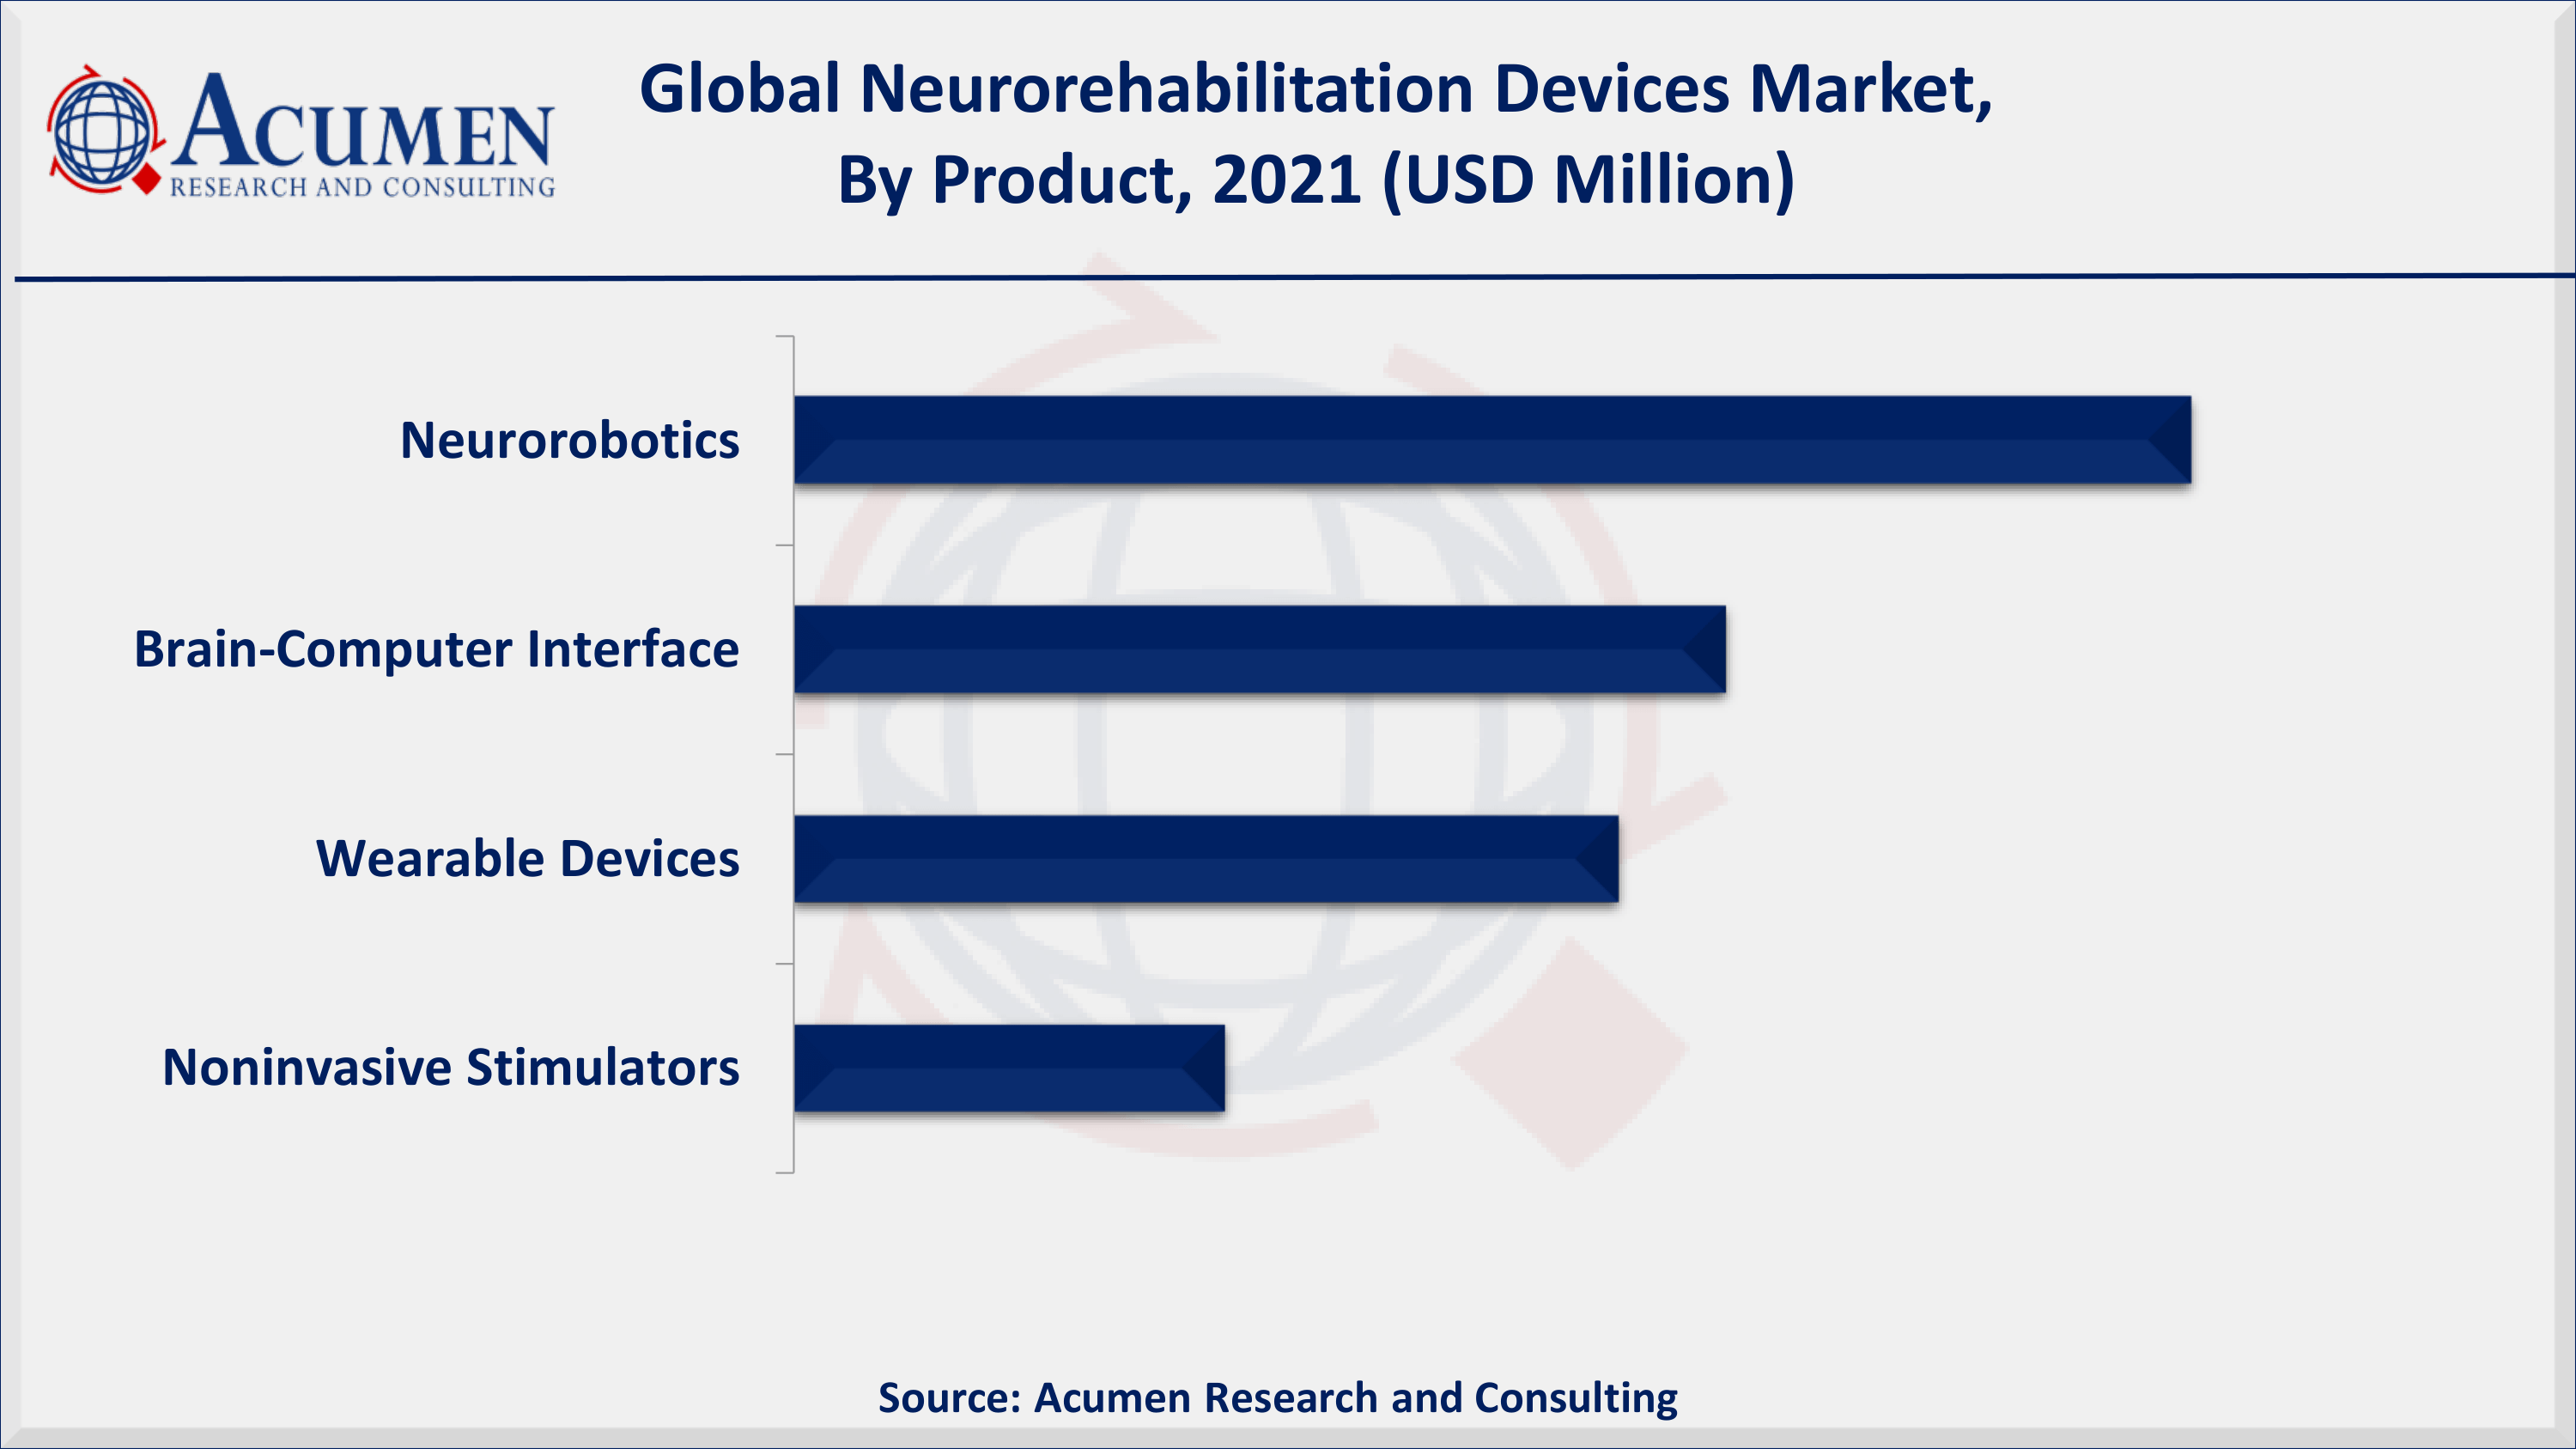 Global neurorehabilitation device market revenue poised to garner USD 1,625 million by 2030 with a CAGR of 14.8% from 2022 to 2030